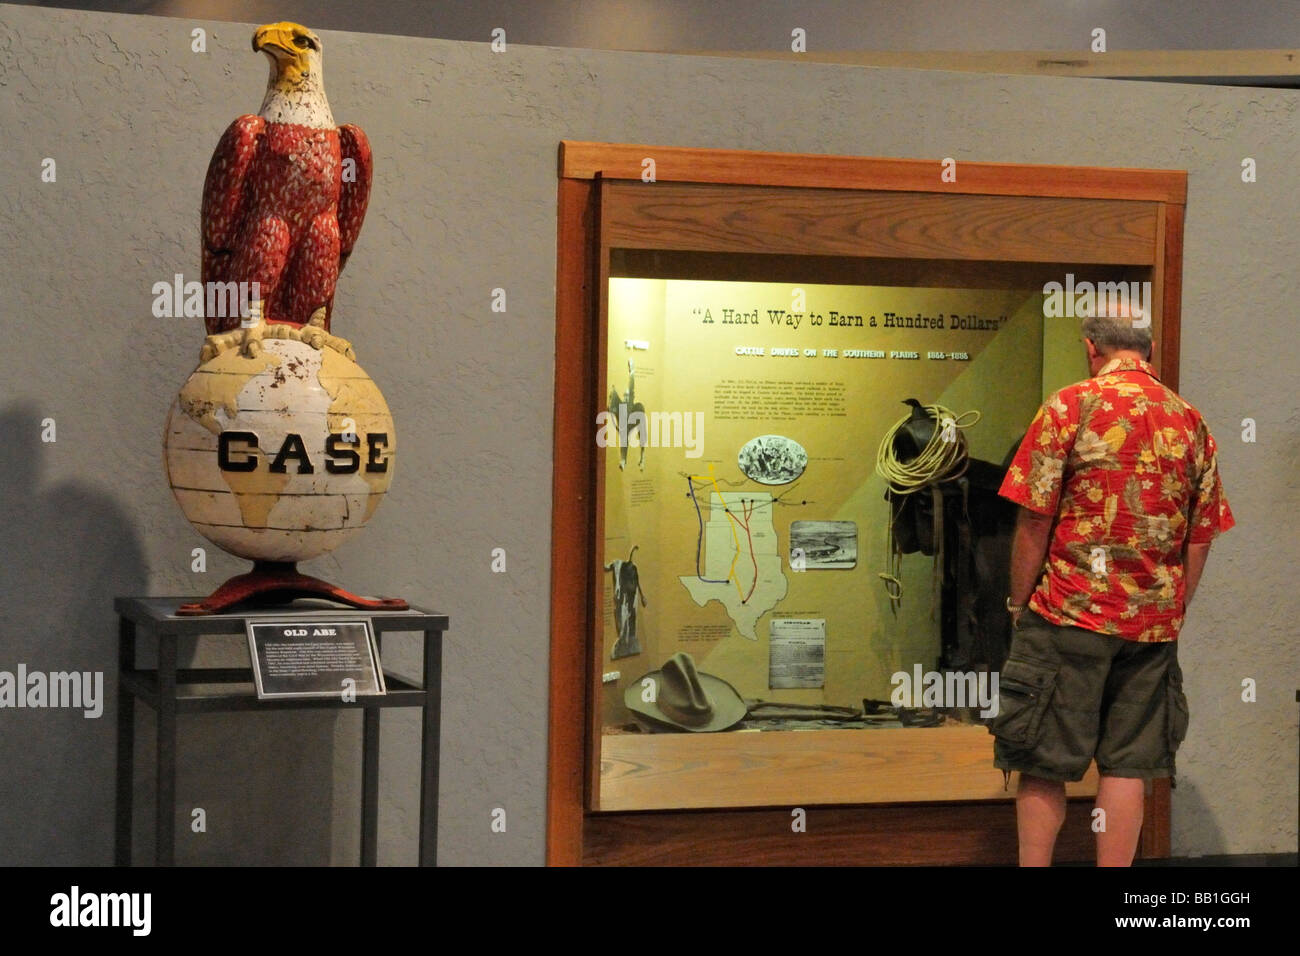 Visitor in the Museum of the Great Plains checks out a display while a bald eagle sculpture looks away Stock Photo